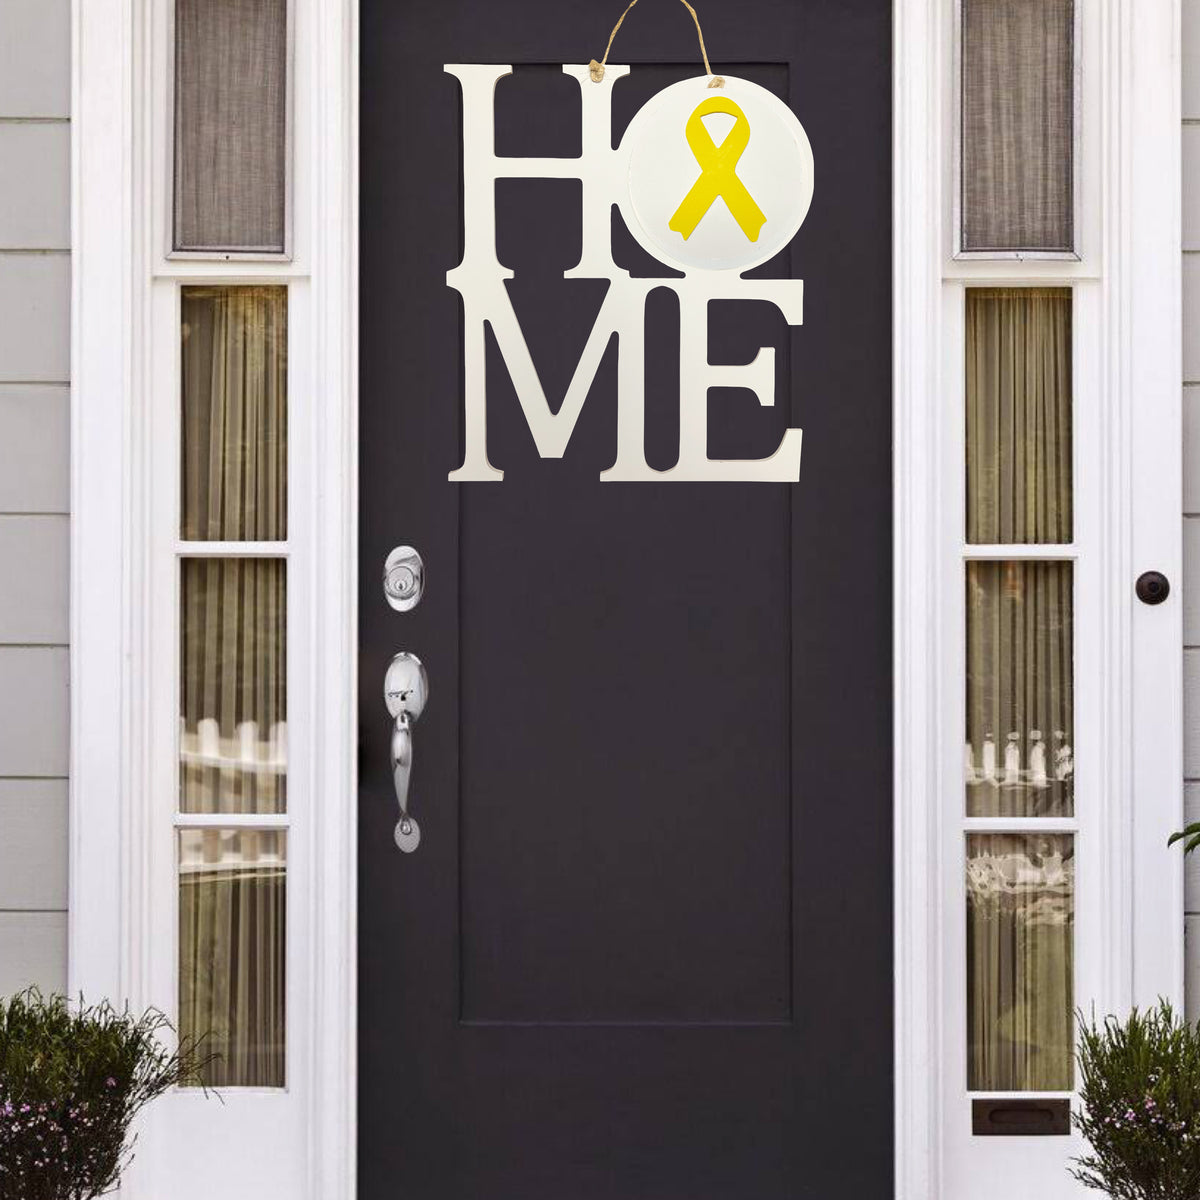 yellow cancer ribbon child cancer childhood cancer bone cancer melanoma gold ribbon yellow ribbon cancer   #homedecoryellowribbon #homedeocrgoldribbon #homedecorcancerribbon #yellowribbon #goldribbon #frontdoorcancerribbon #doorhangercancerribbon #cancerribbonsign #cancerribbonhomesign